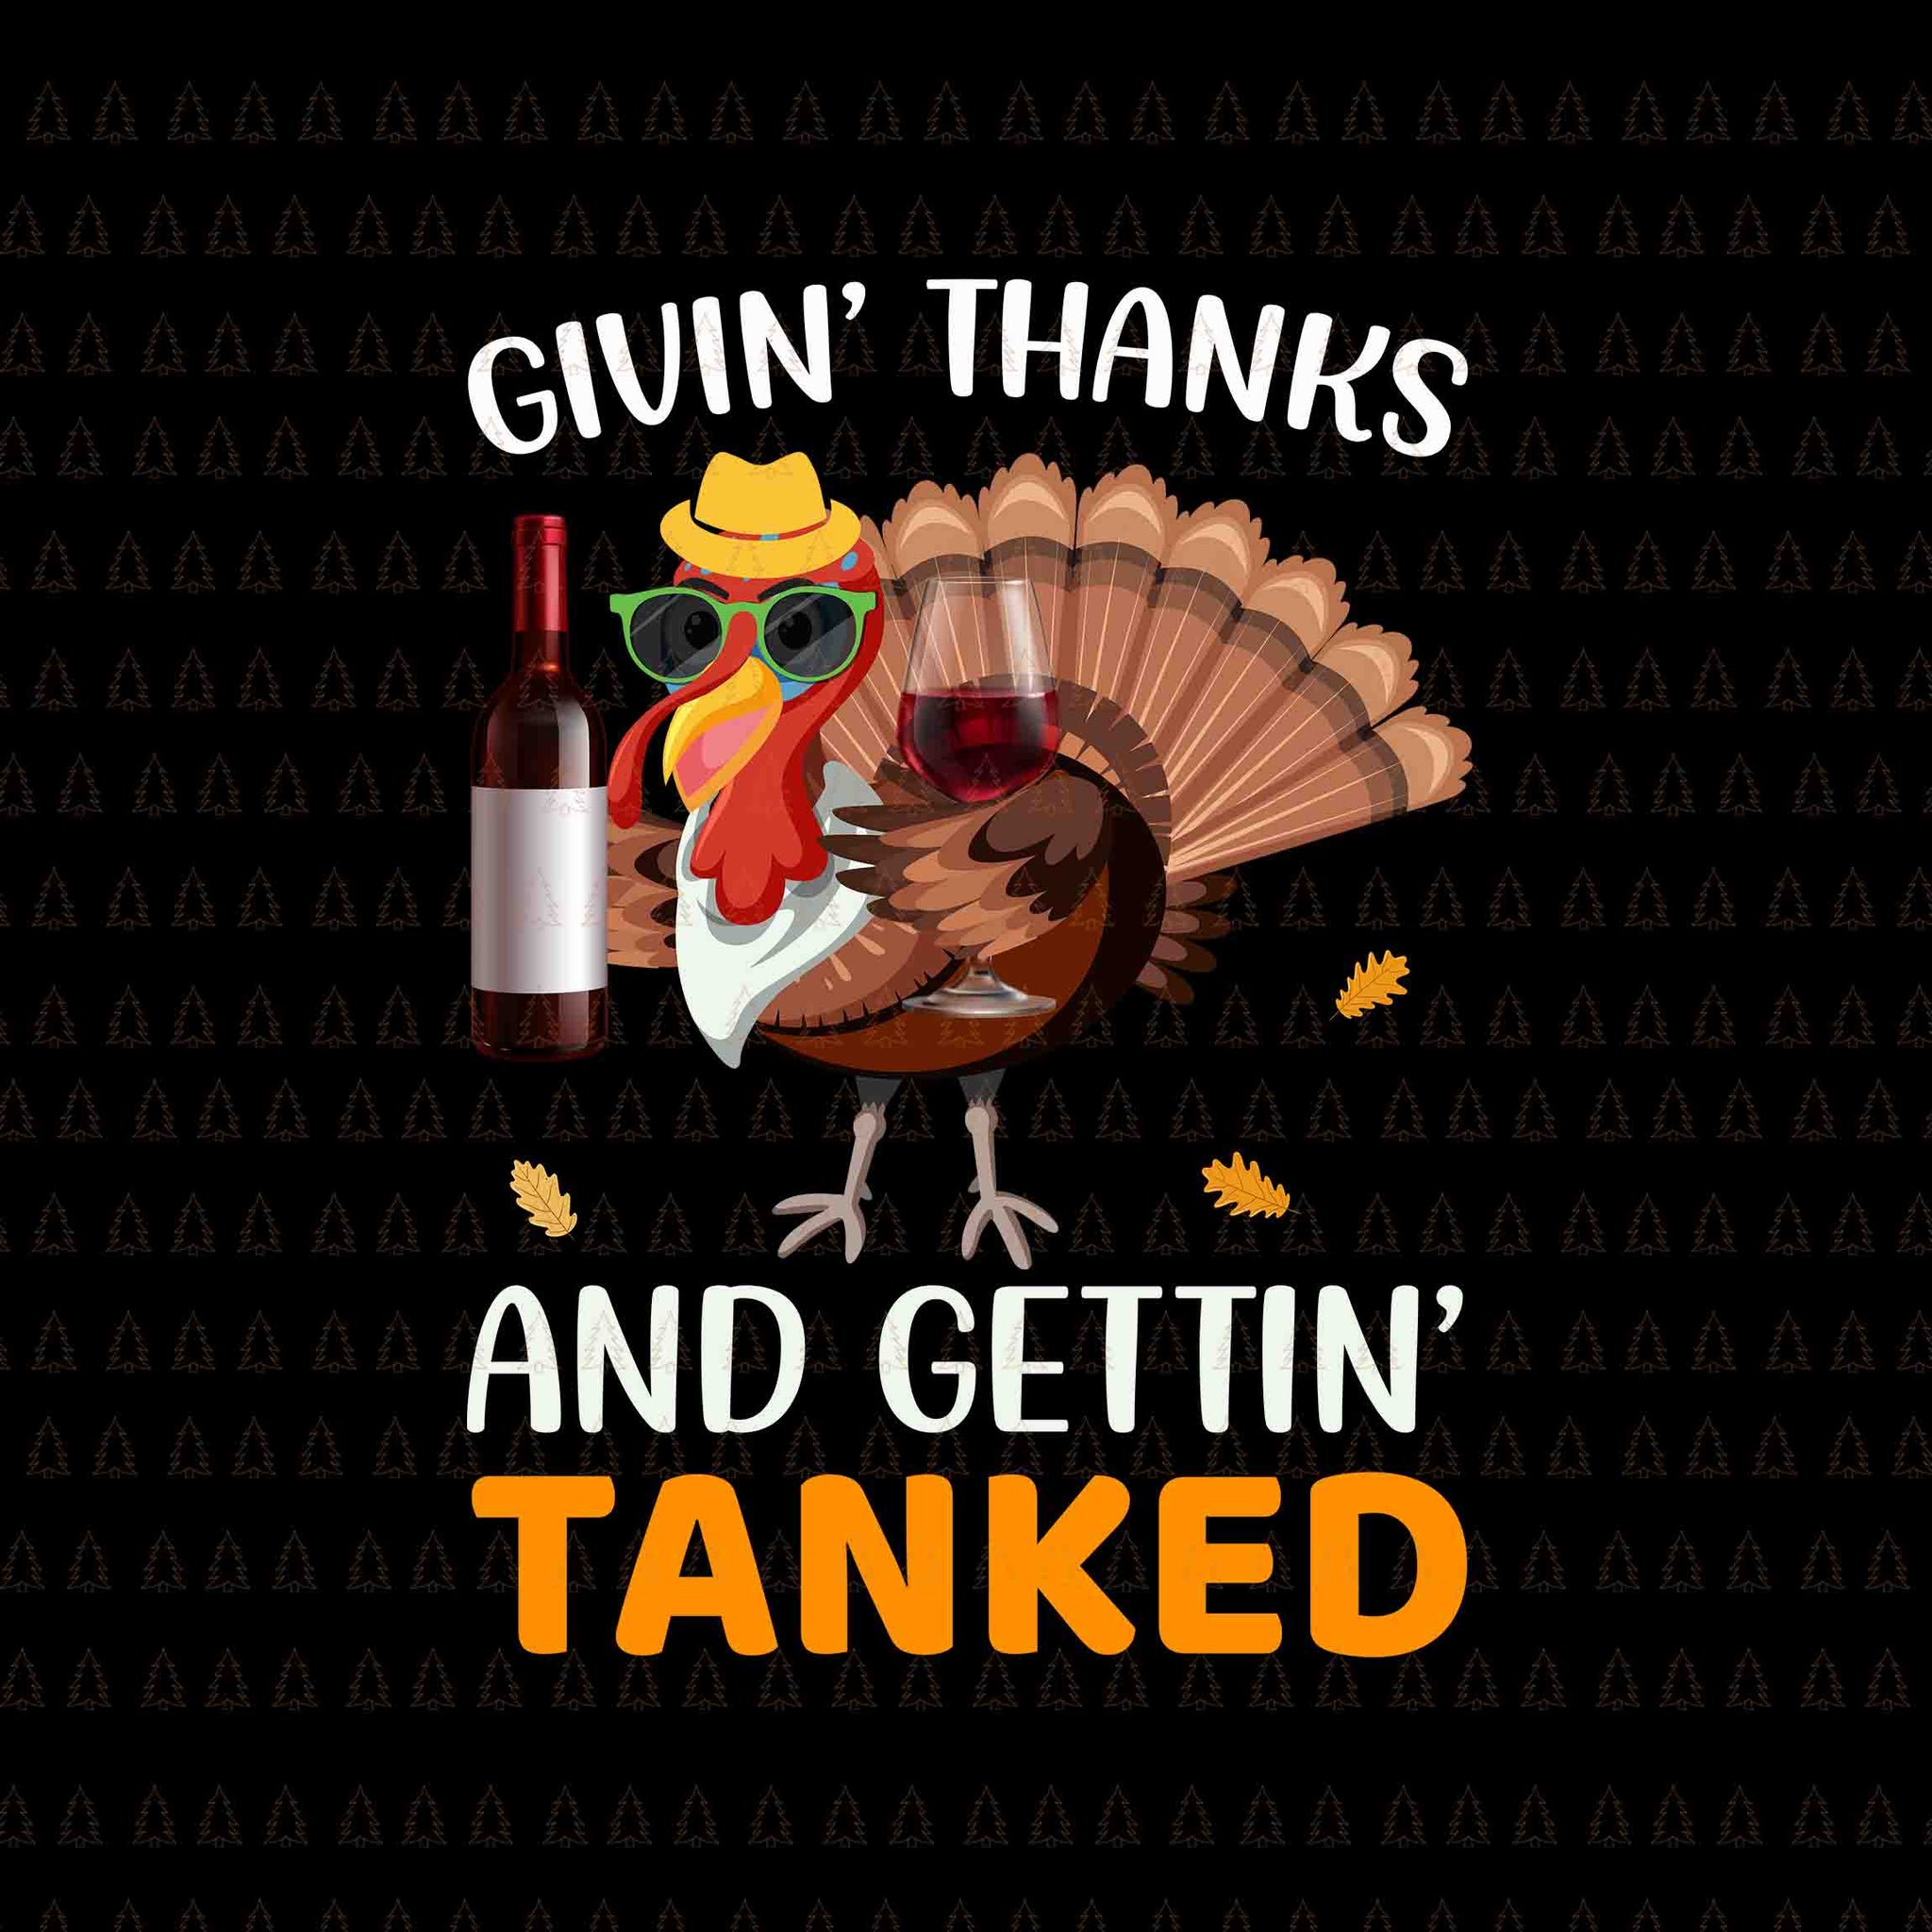 Givin' Thanks And Gettin' Tanked Svg, I Gave My Family The Bird Svg, Happy Thanksgiving Svg, Turkey Svg, Turkey Day Svg, Thanksgiving Svg, Thanksgiving Turkey Svg, Thanksgiving 2021 Svg